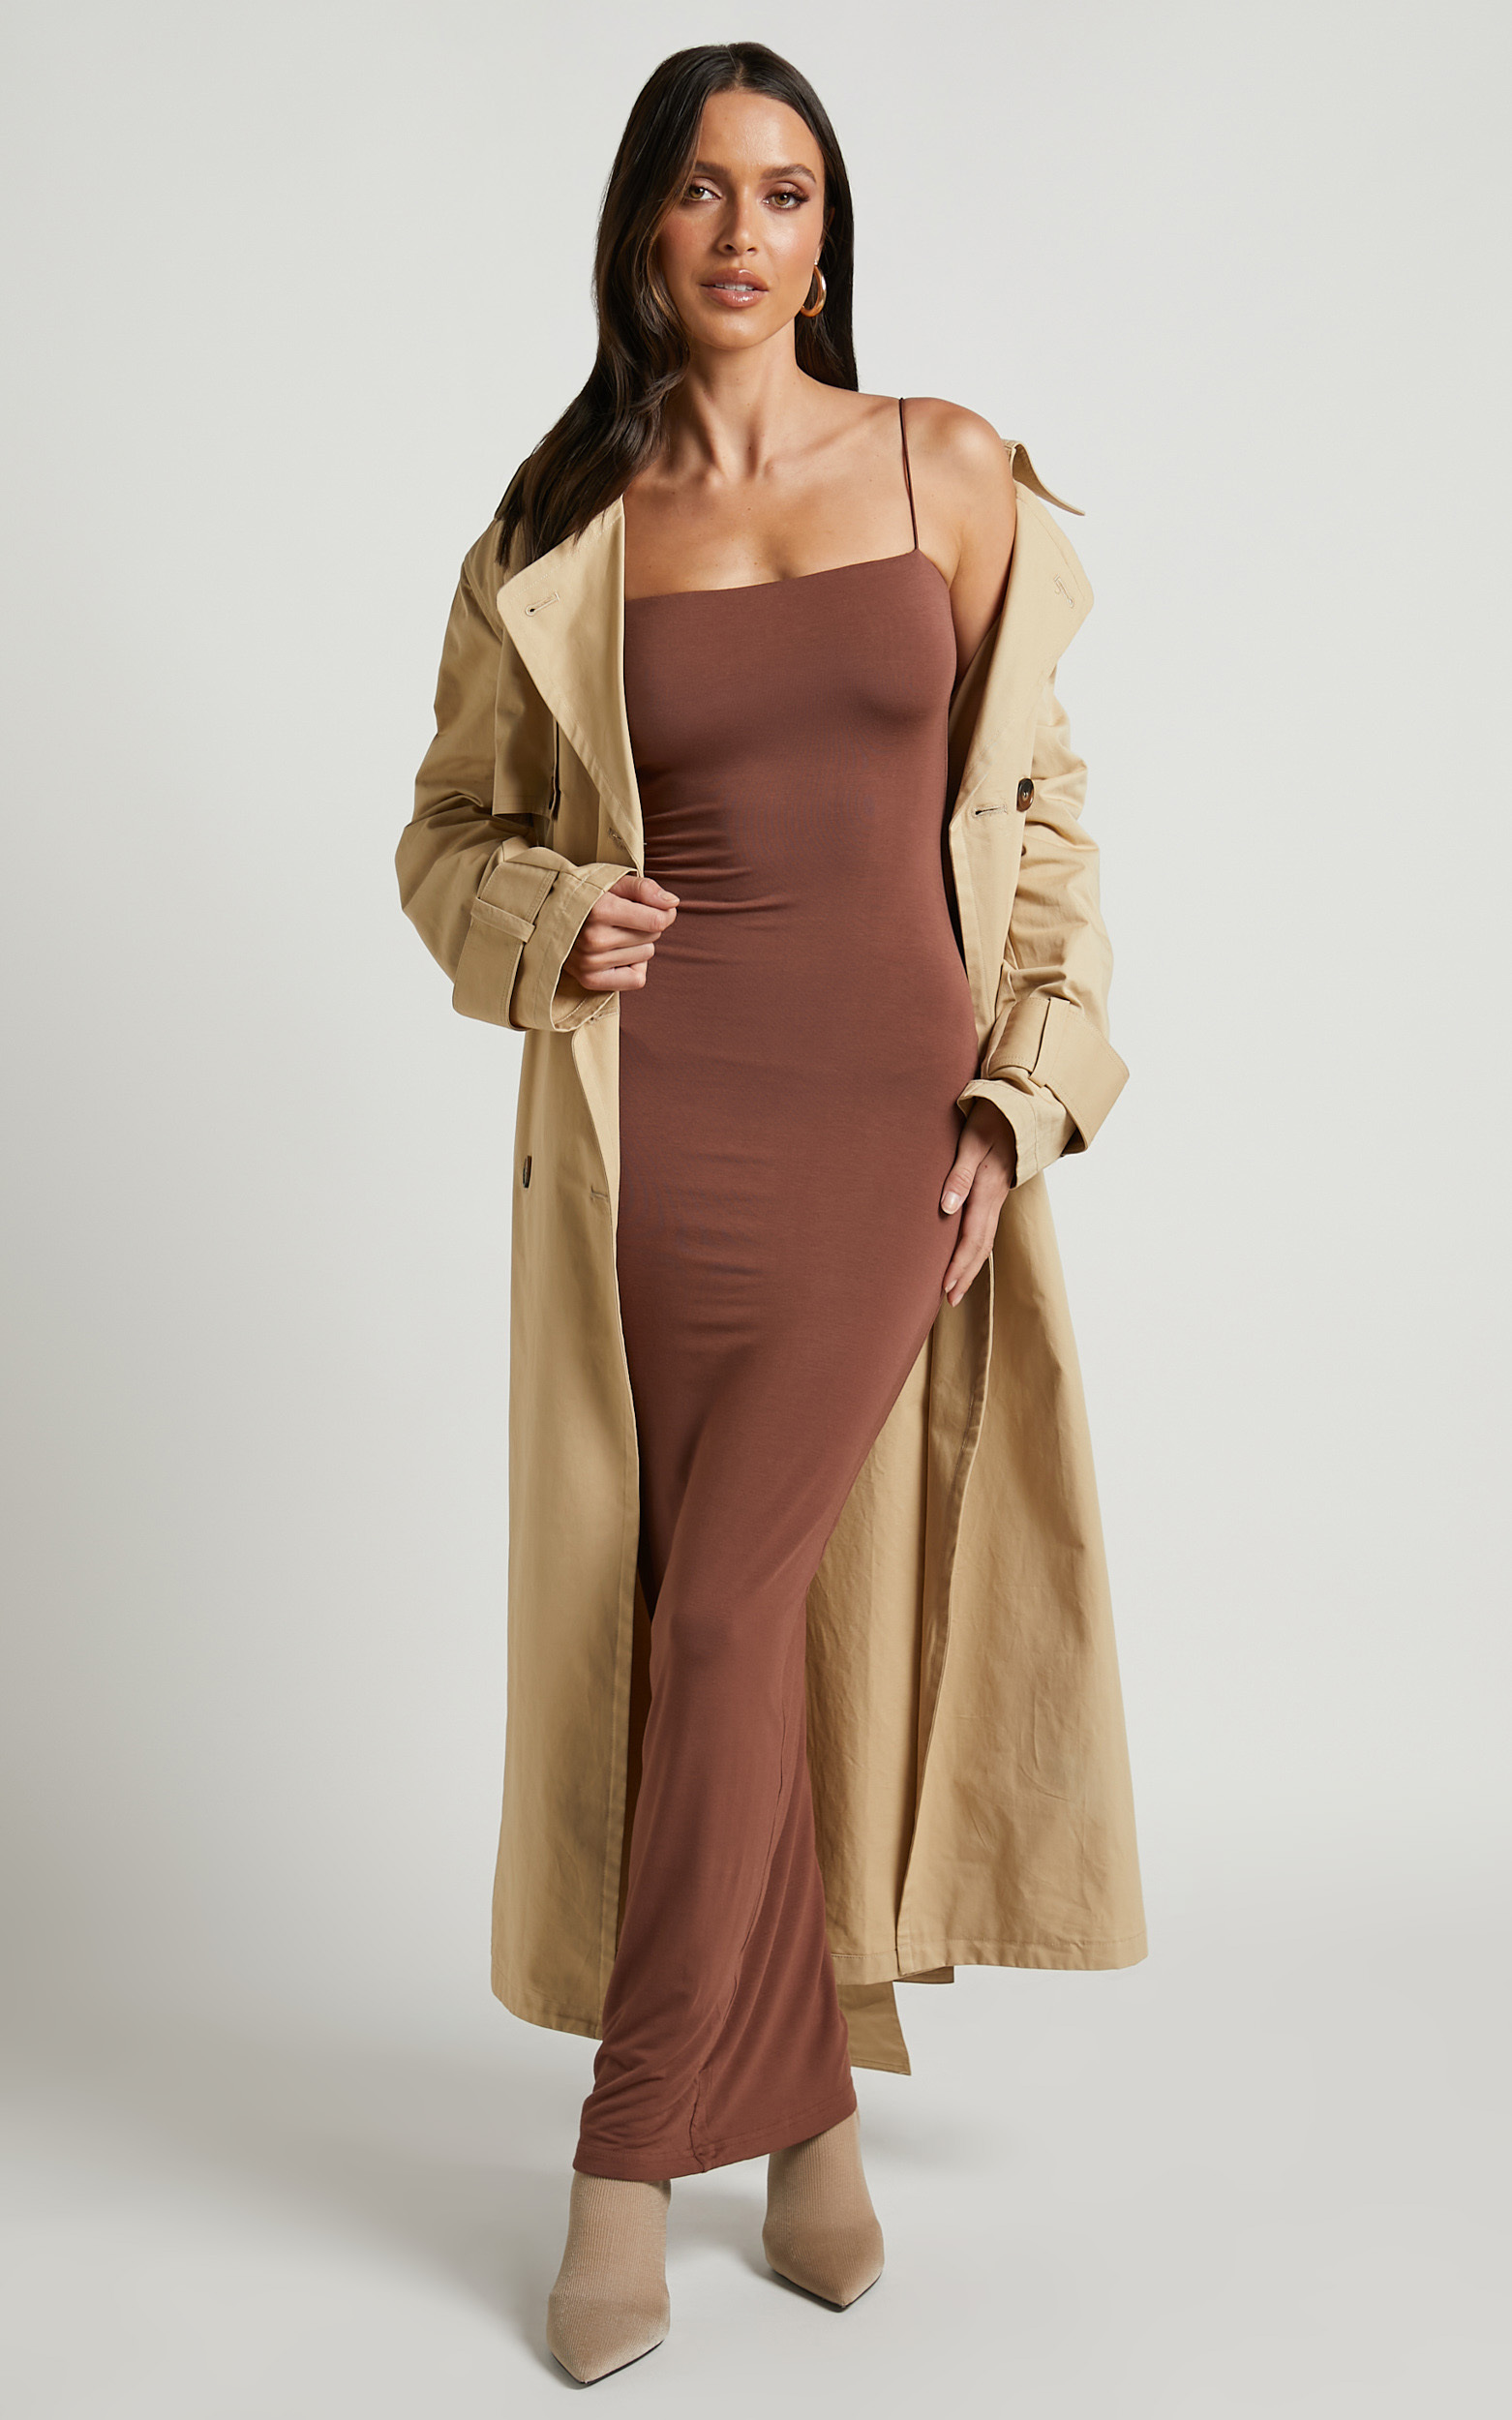 Celene Slim Fit Bodycon Maxi Dress in Chocolate - 06, BRN2, hi-res image number null